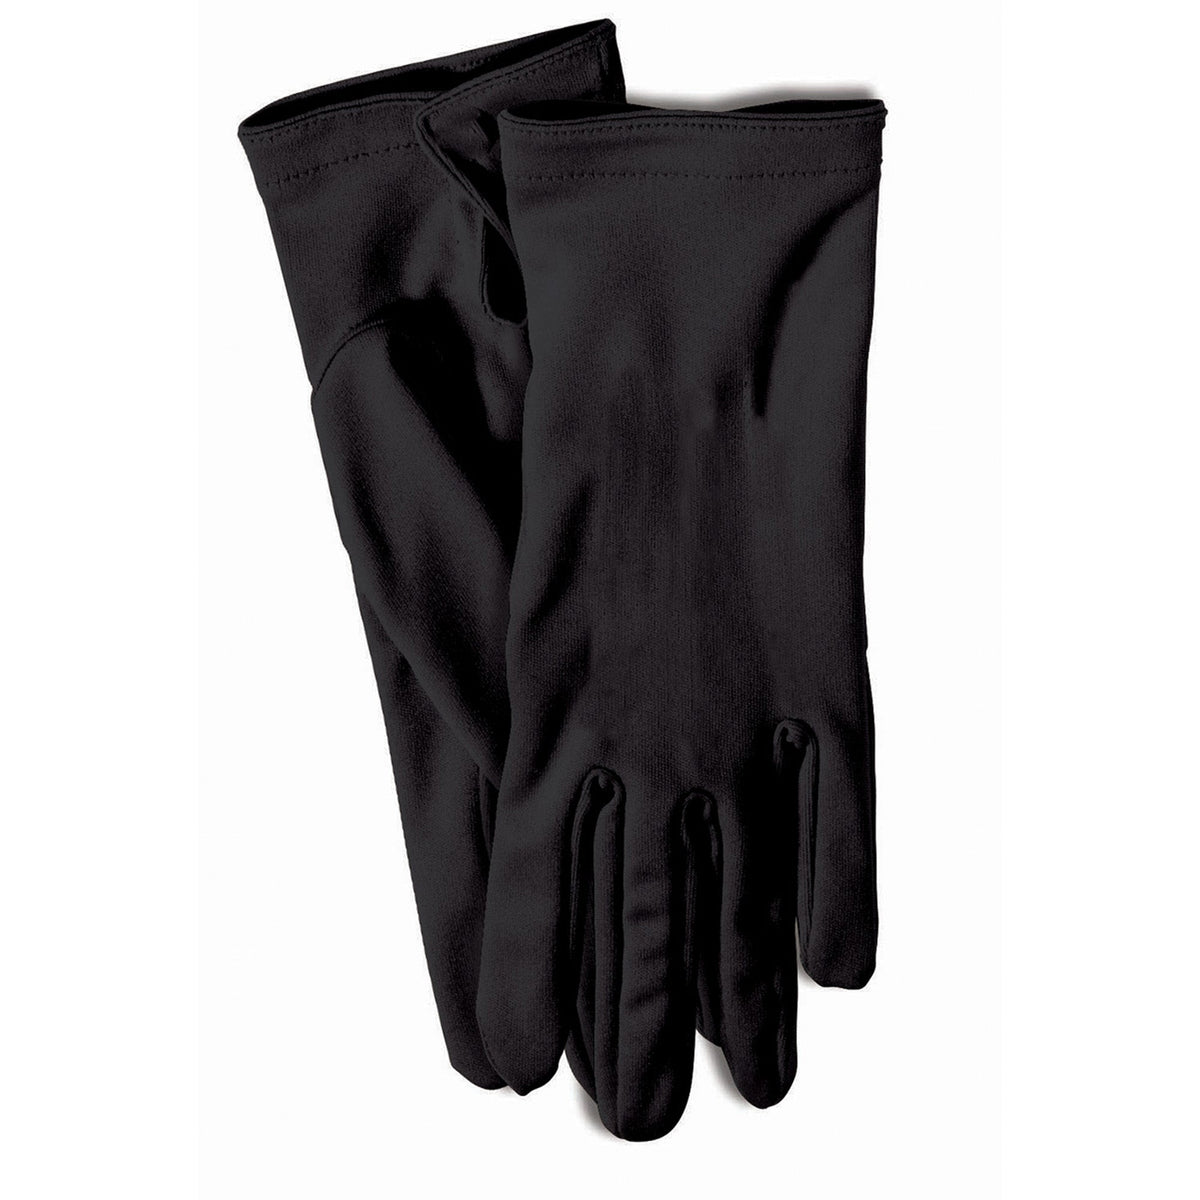 RUBIES II (Ruby Slipper Sales) Costume Accessories Black Short Gloves for Adults 721773717055